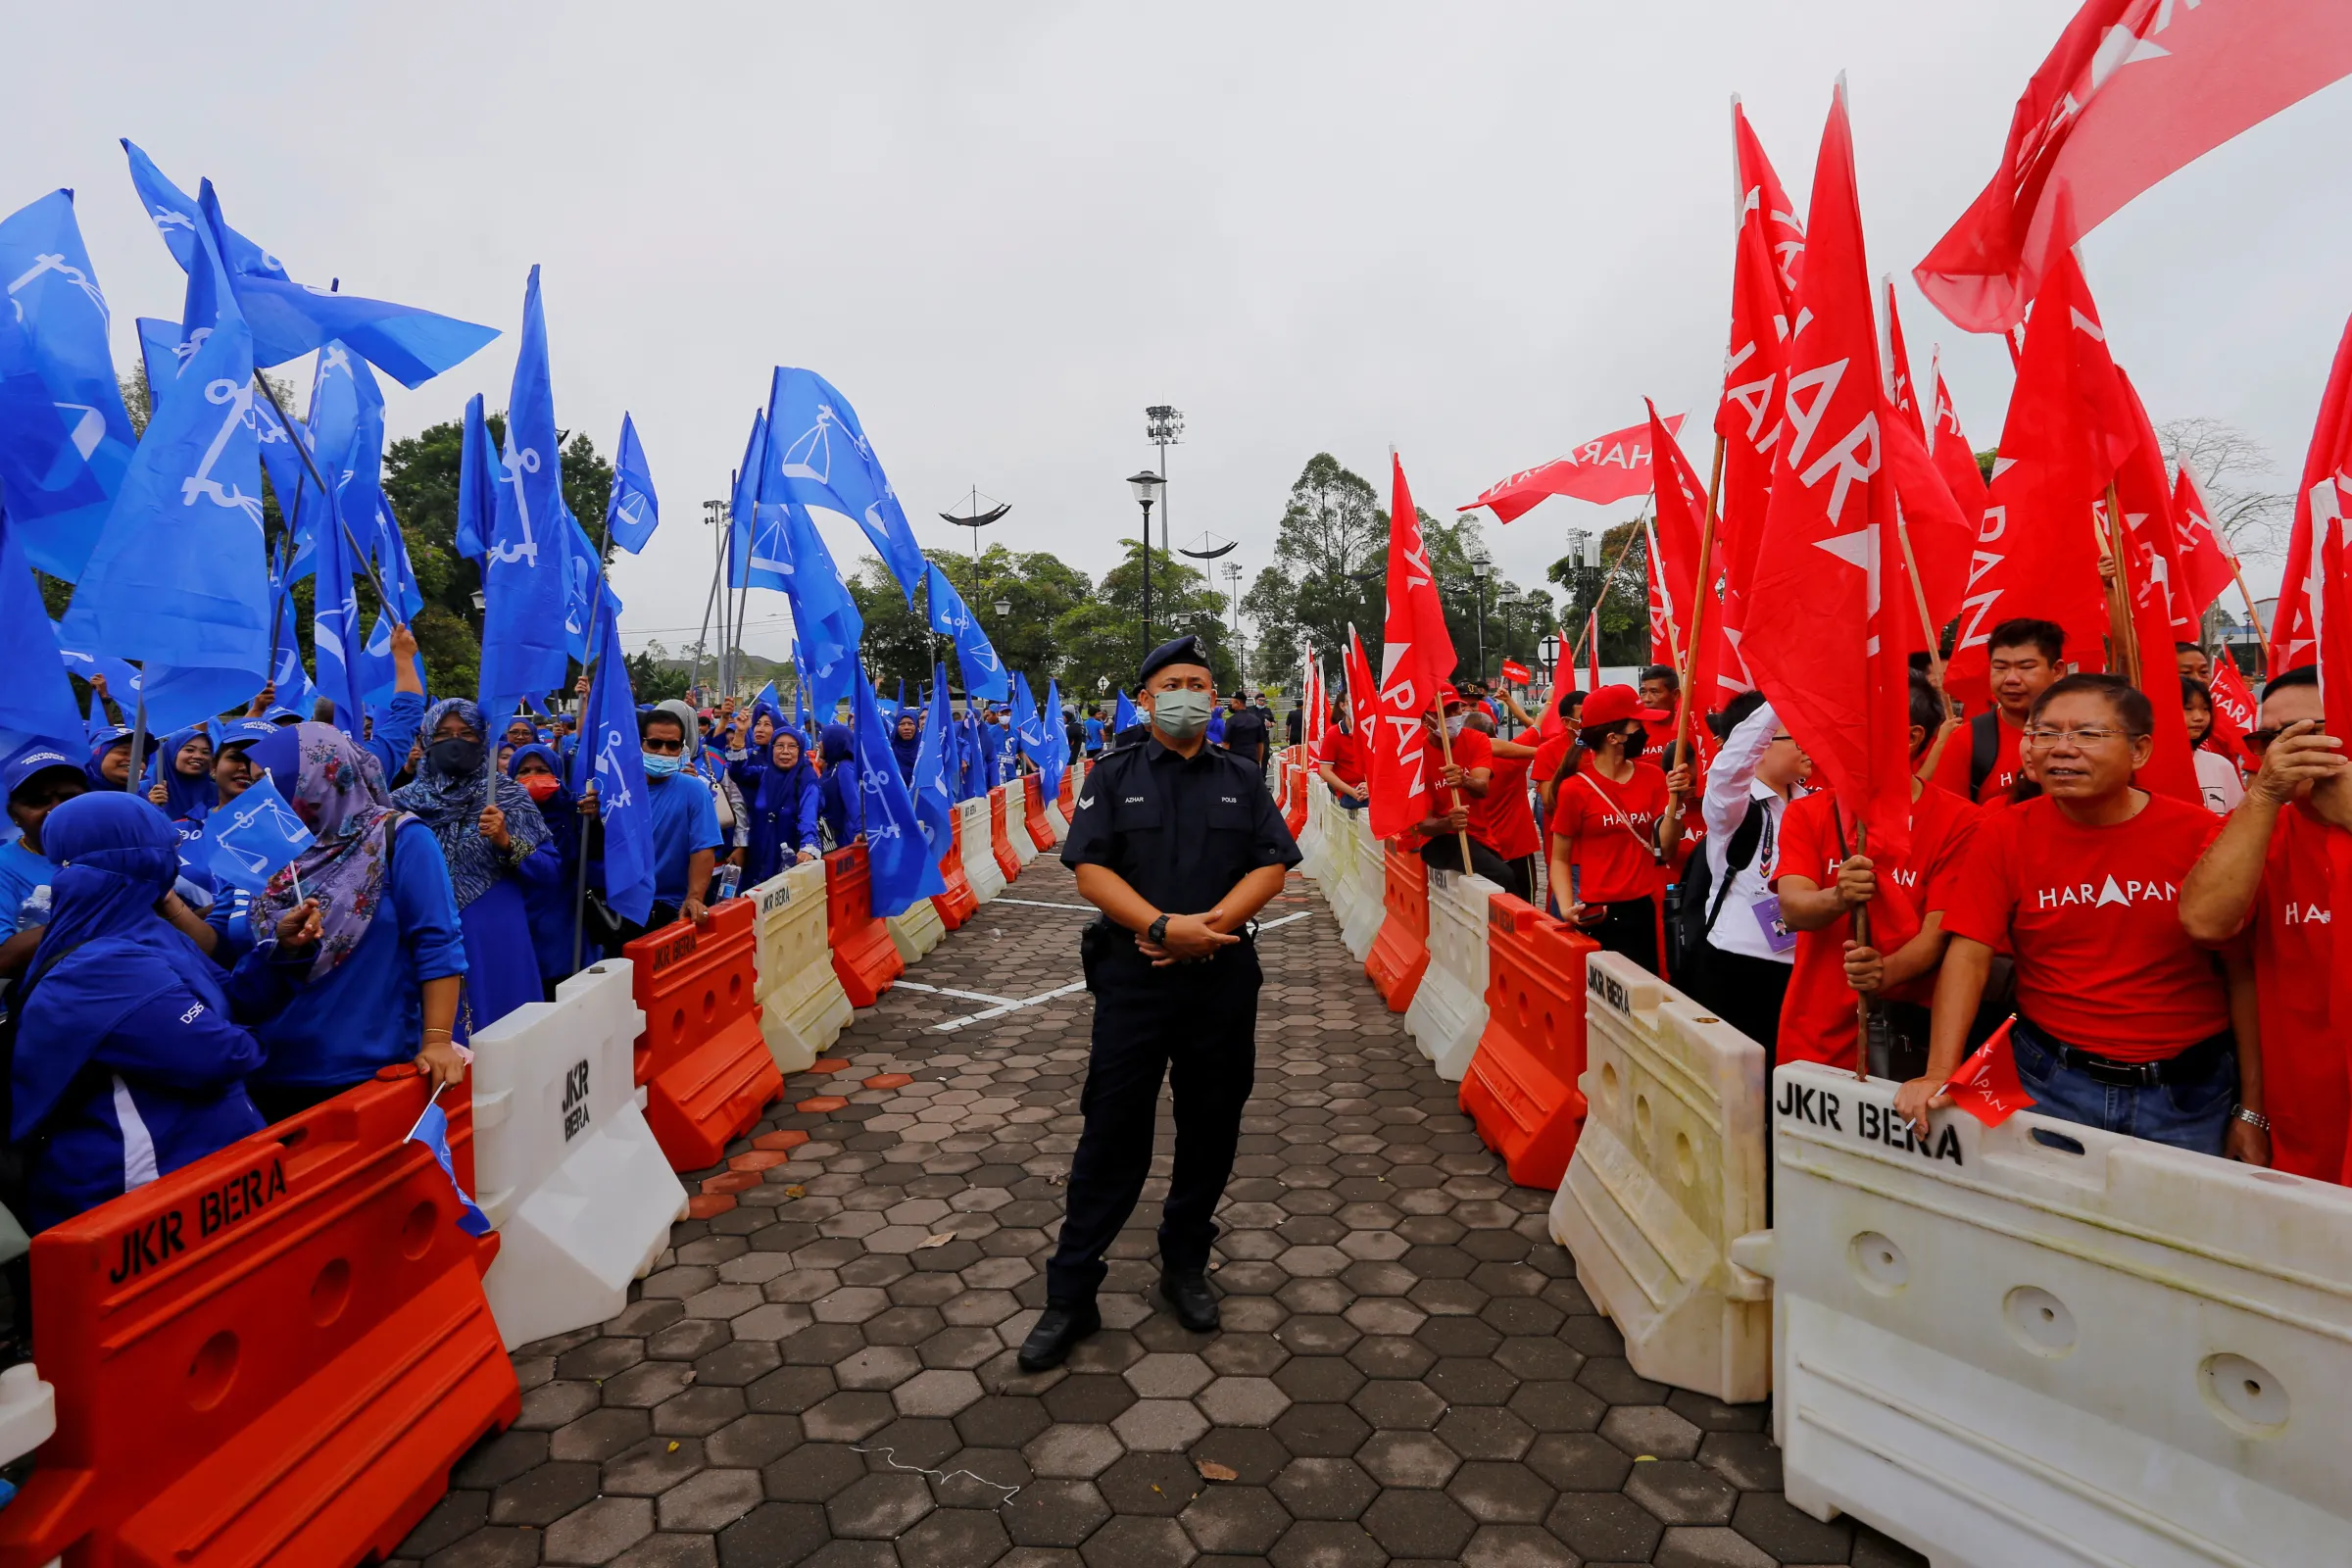 A police stands guard between supporters of The National Front coalition, Barisan Nasional, and The Alliance Of Hope, Pakatan Harapan, outside a nomination centre on nomination day in Bera, Pahang, Malaysia November 5, 2022. REUTERS/Lai Seng Sin